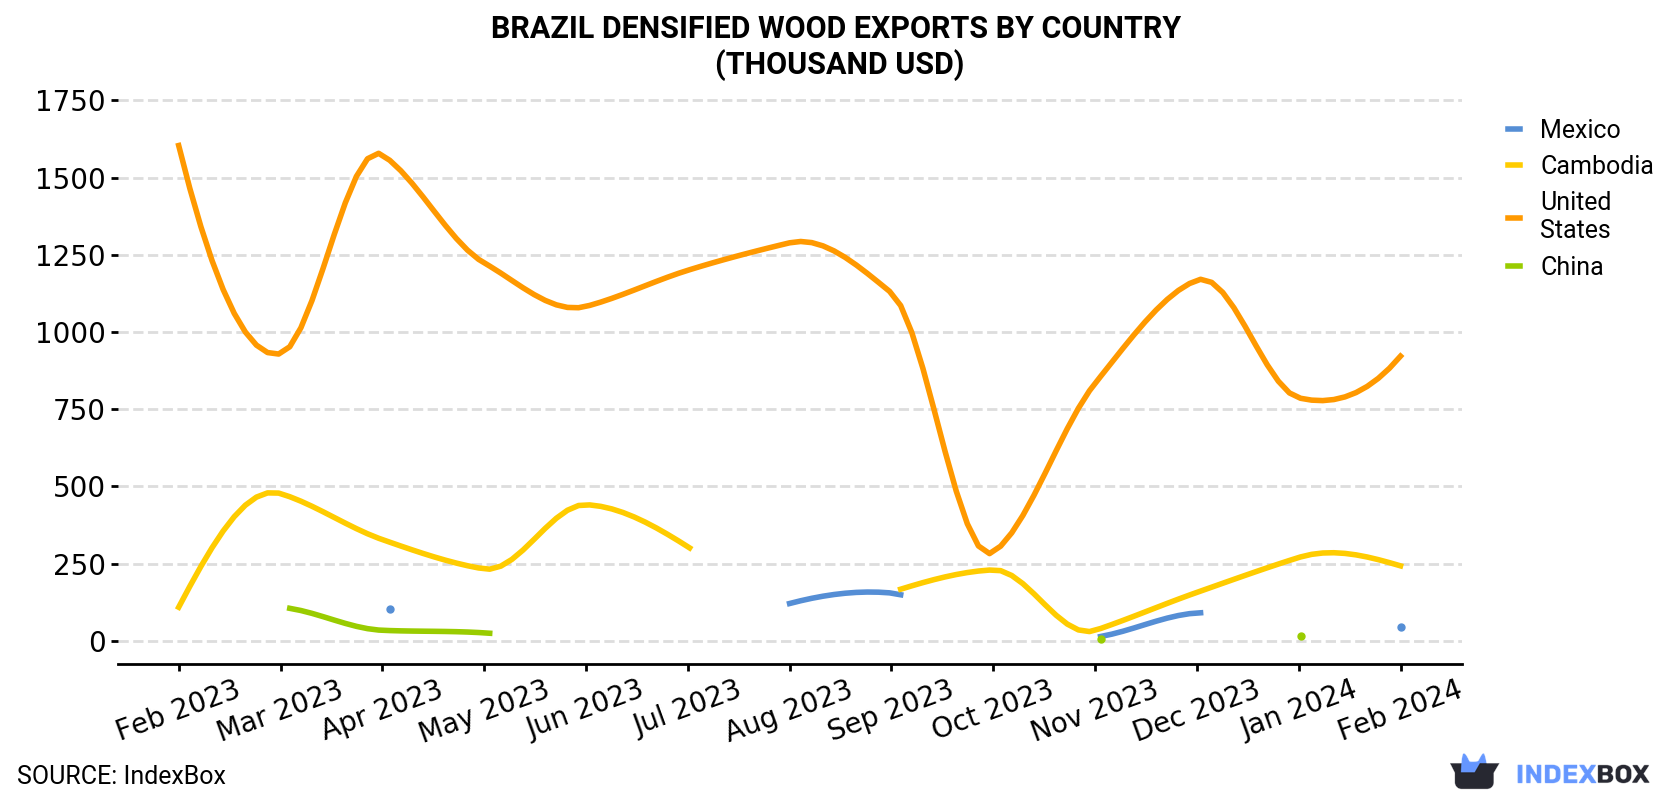 Brazil Densified Wood Exports By Country (Thousand USD)